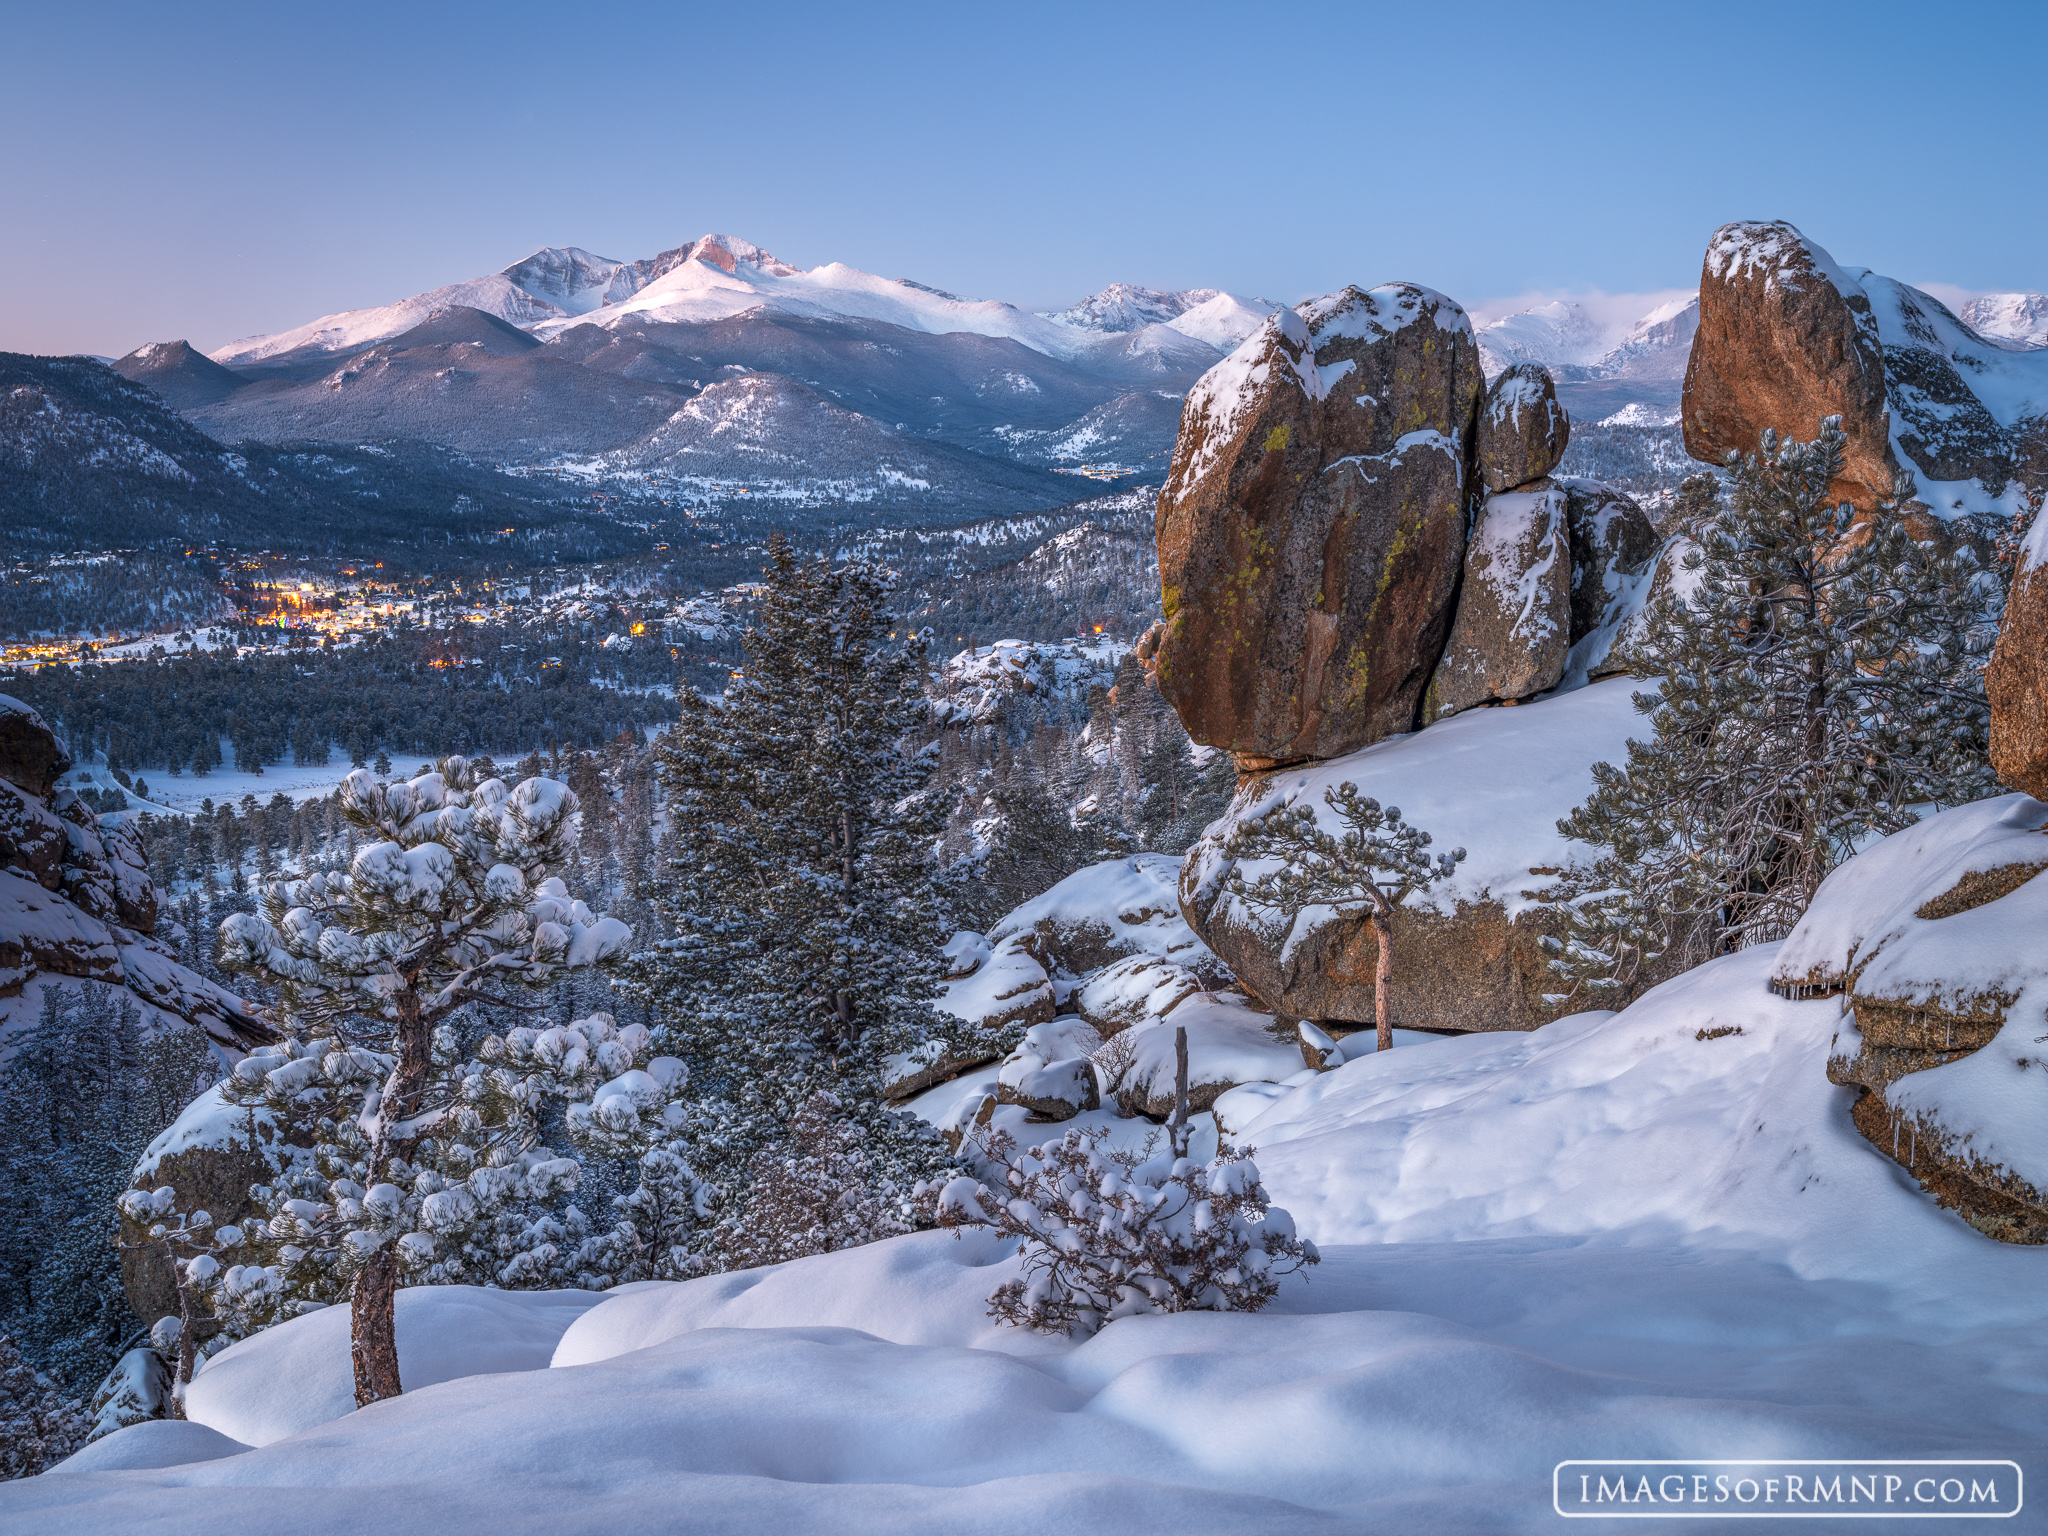 The previous night’s winter storm blanketed the earth with fresh snow. As this new day dawns, the lights of Estes Park, Colorado...